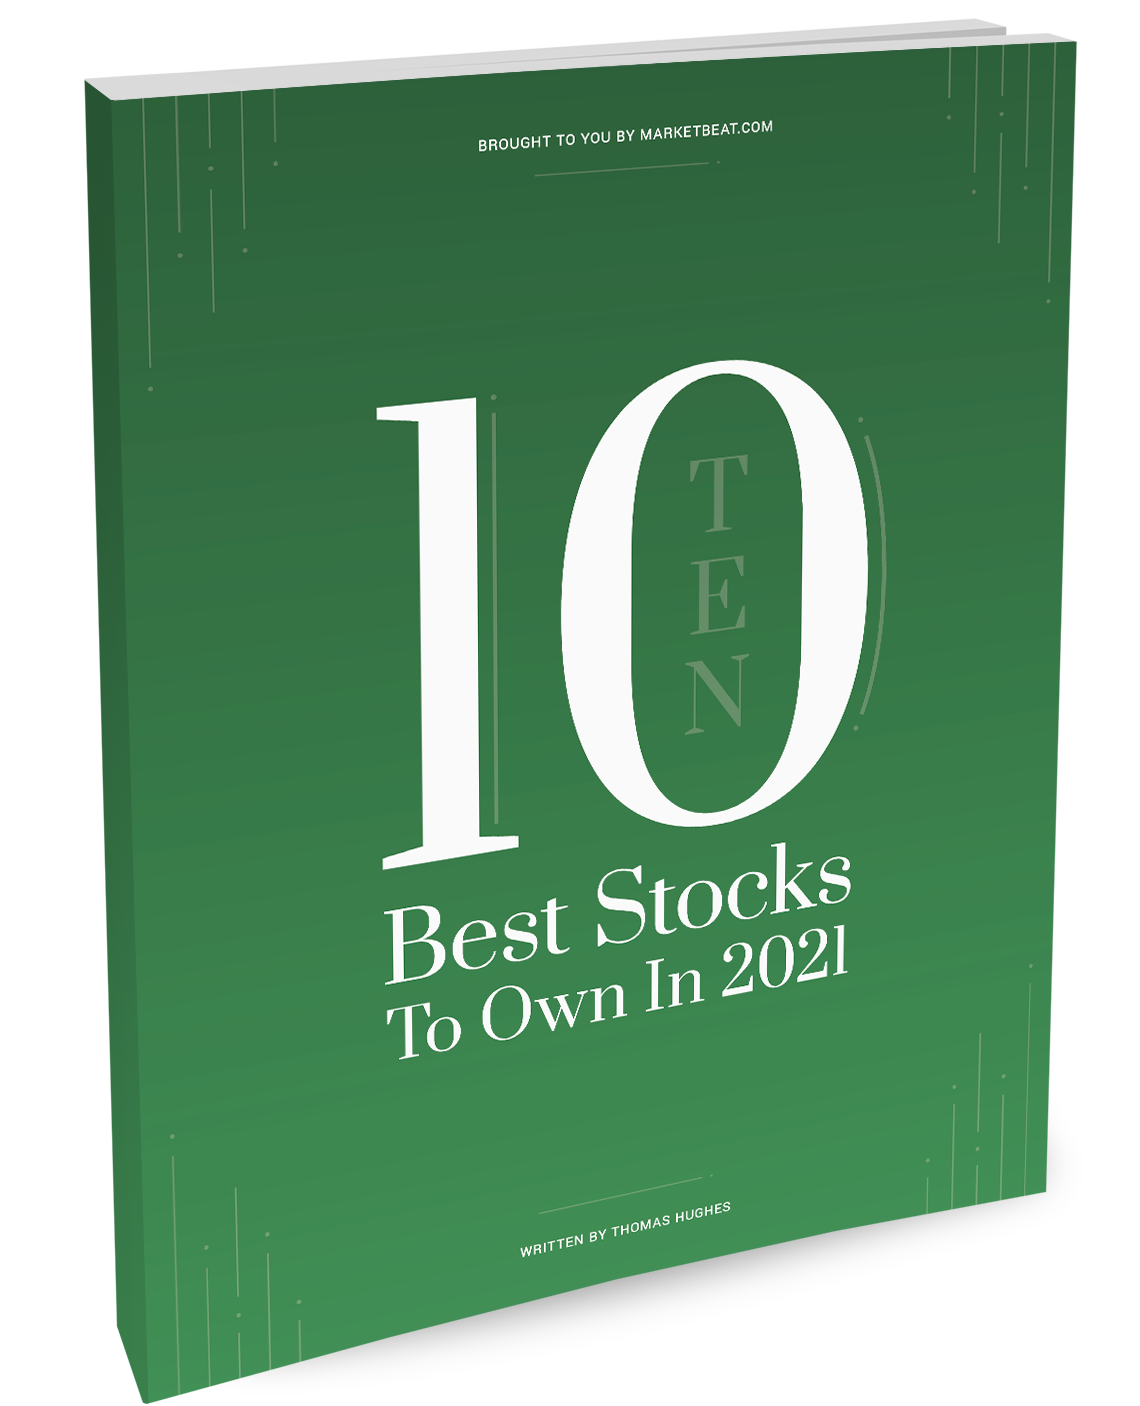 The 10 Best Stocks to Own in 2021